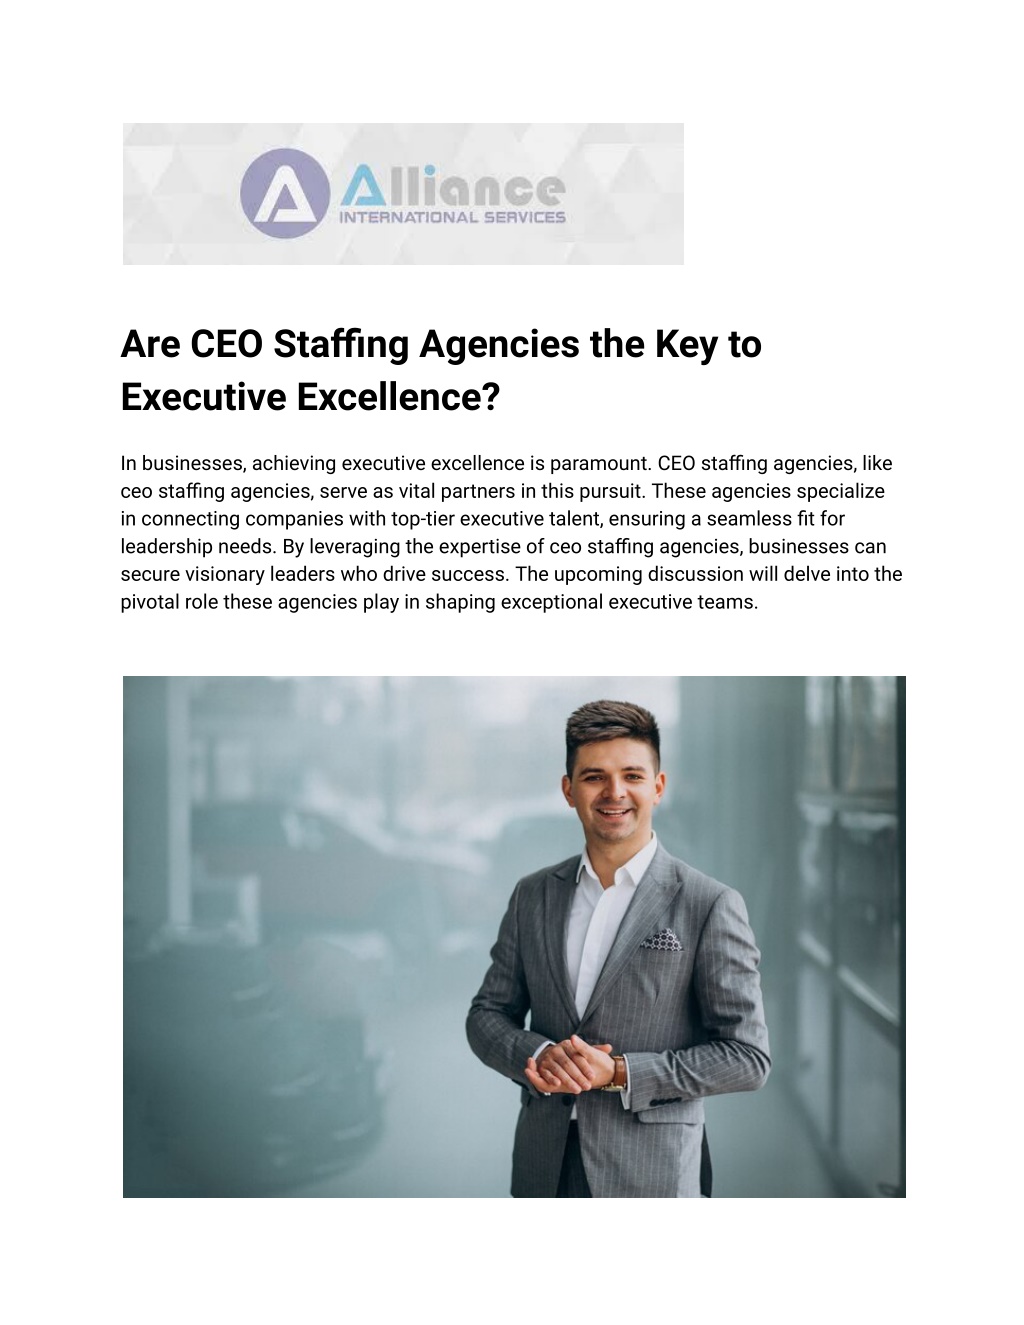 are ceo staffing agencies the key to executive l.w